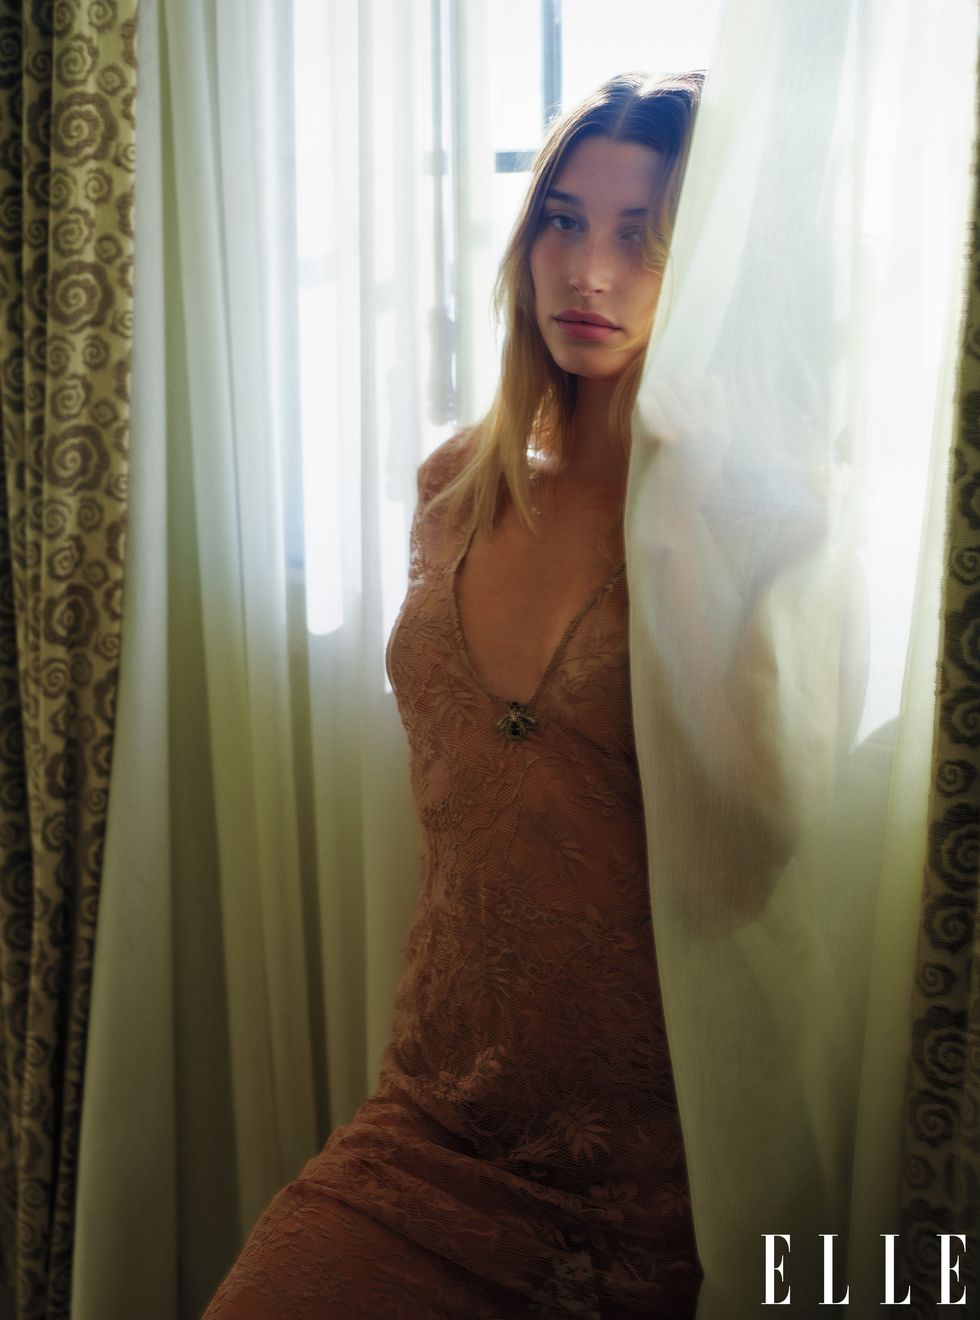 hailey baldwin stands among the draperies in a dress